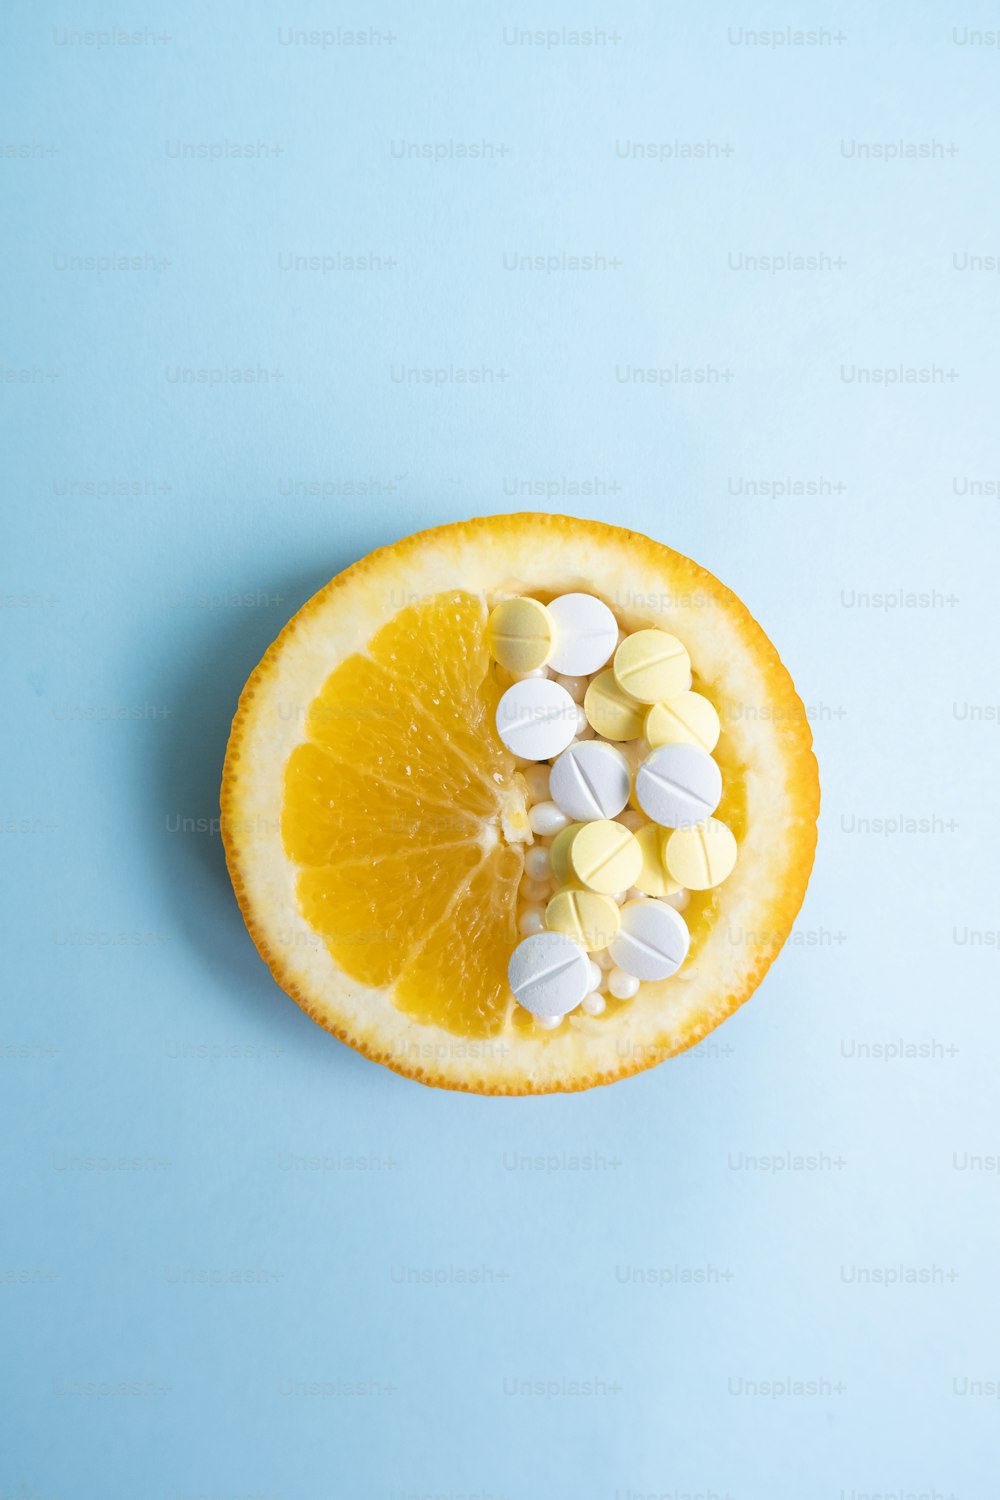 a half of an orange with pills on top of it